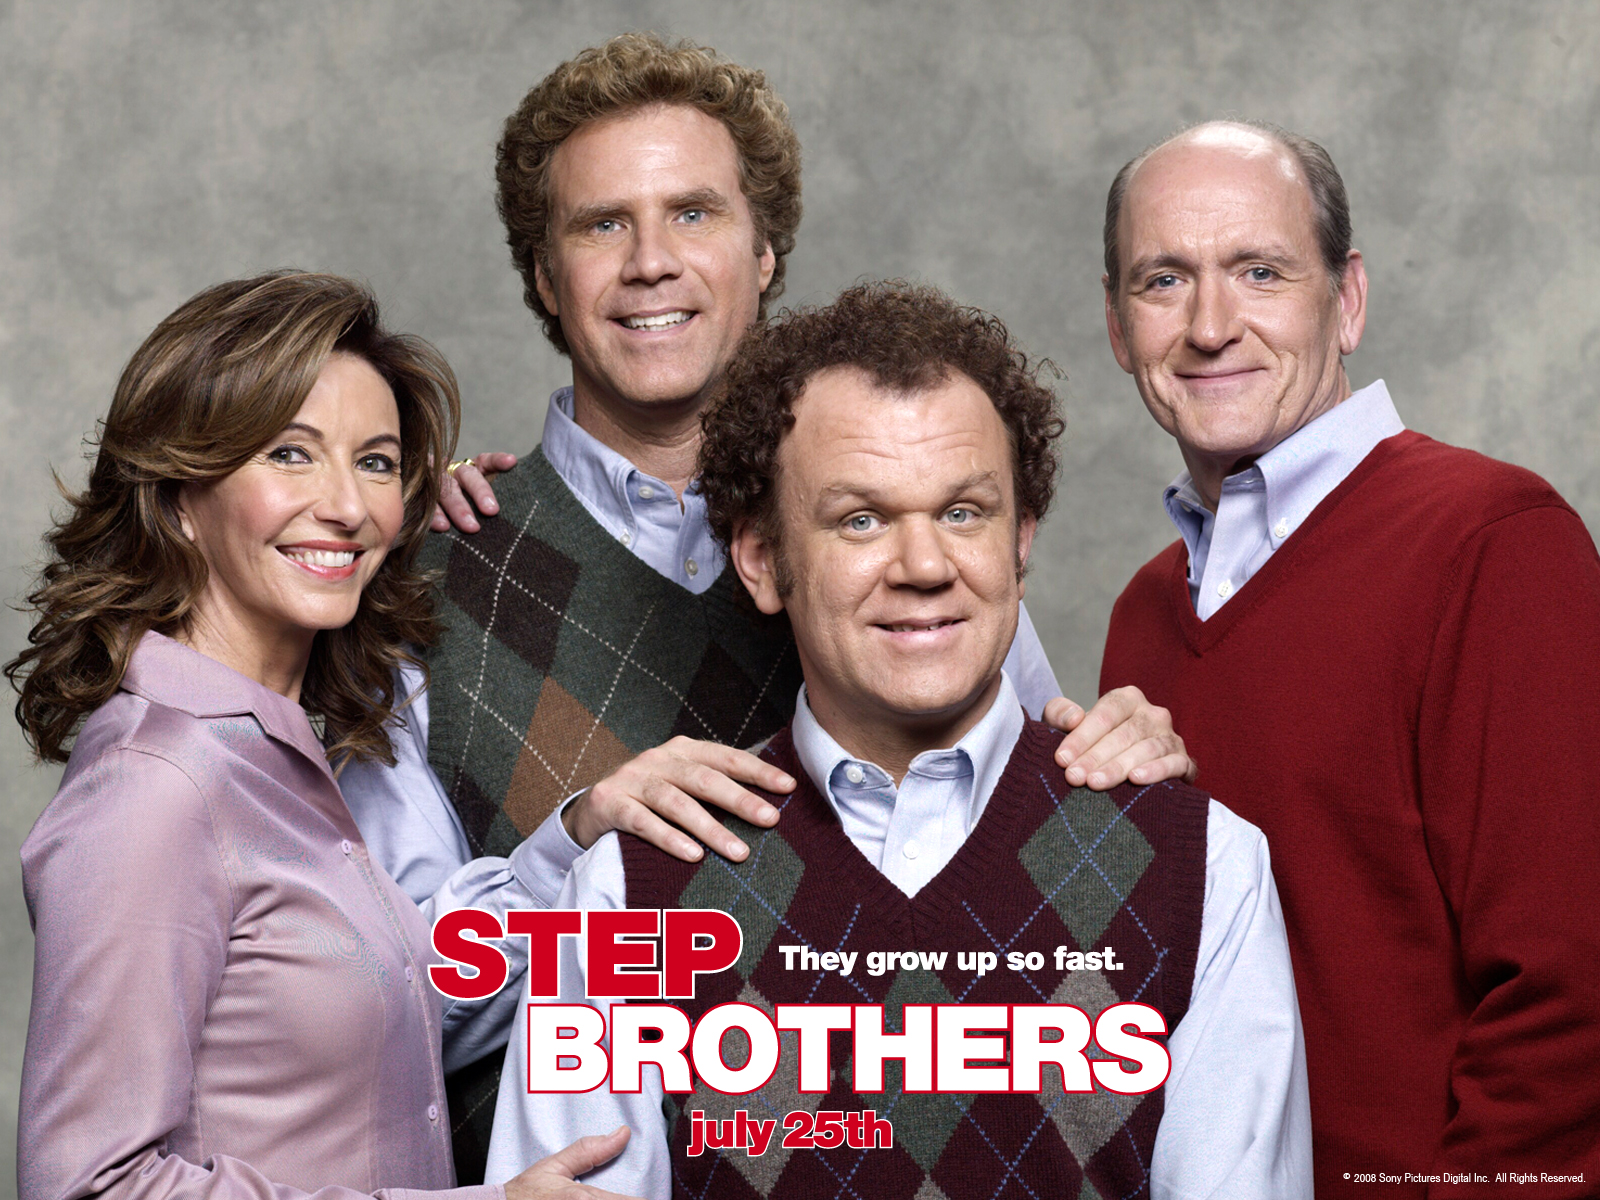 Step Brothers Movie Portrait HD Wallpaper, Background Images